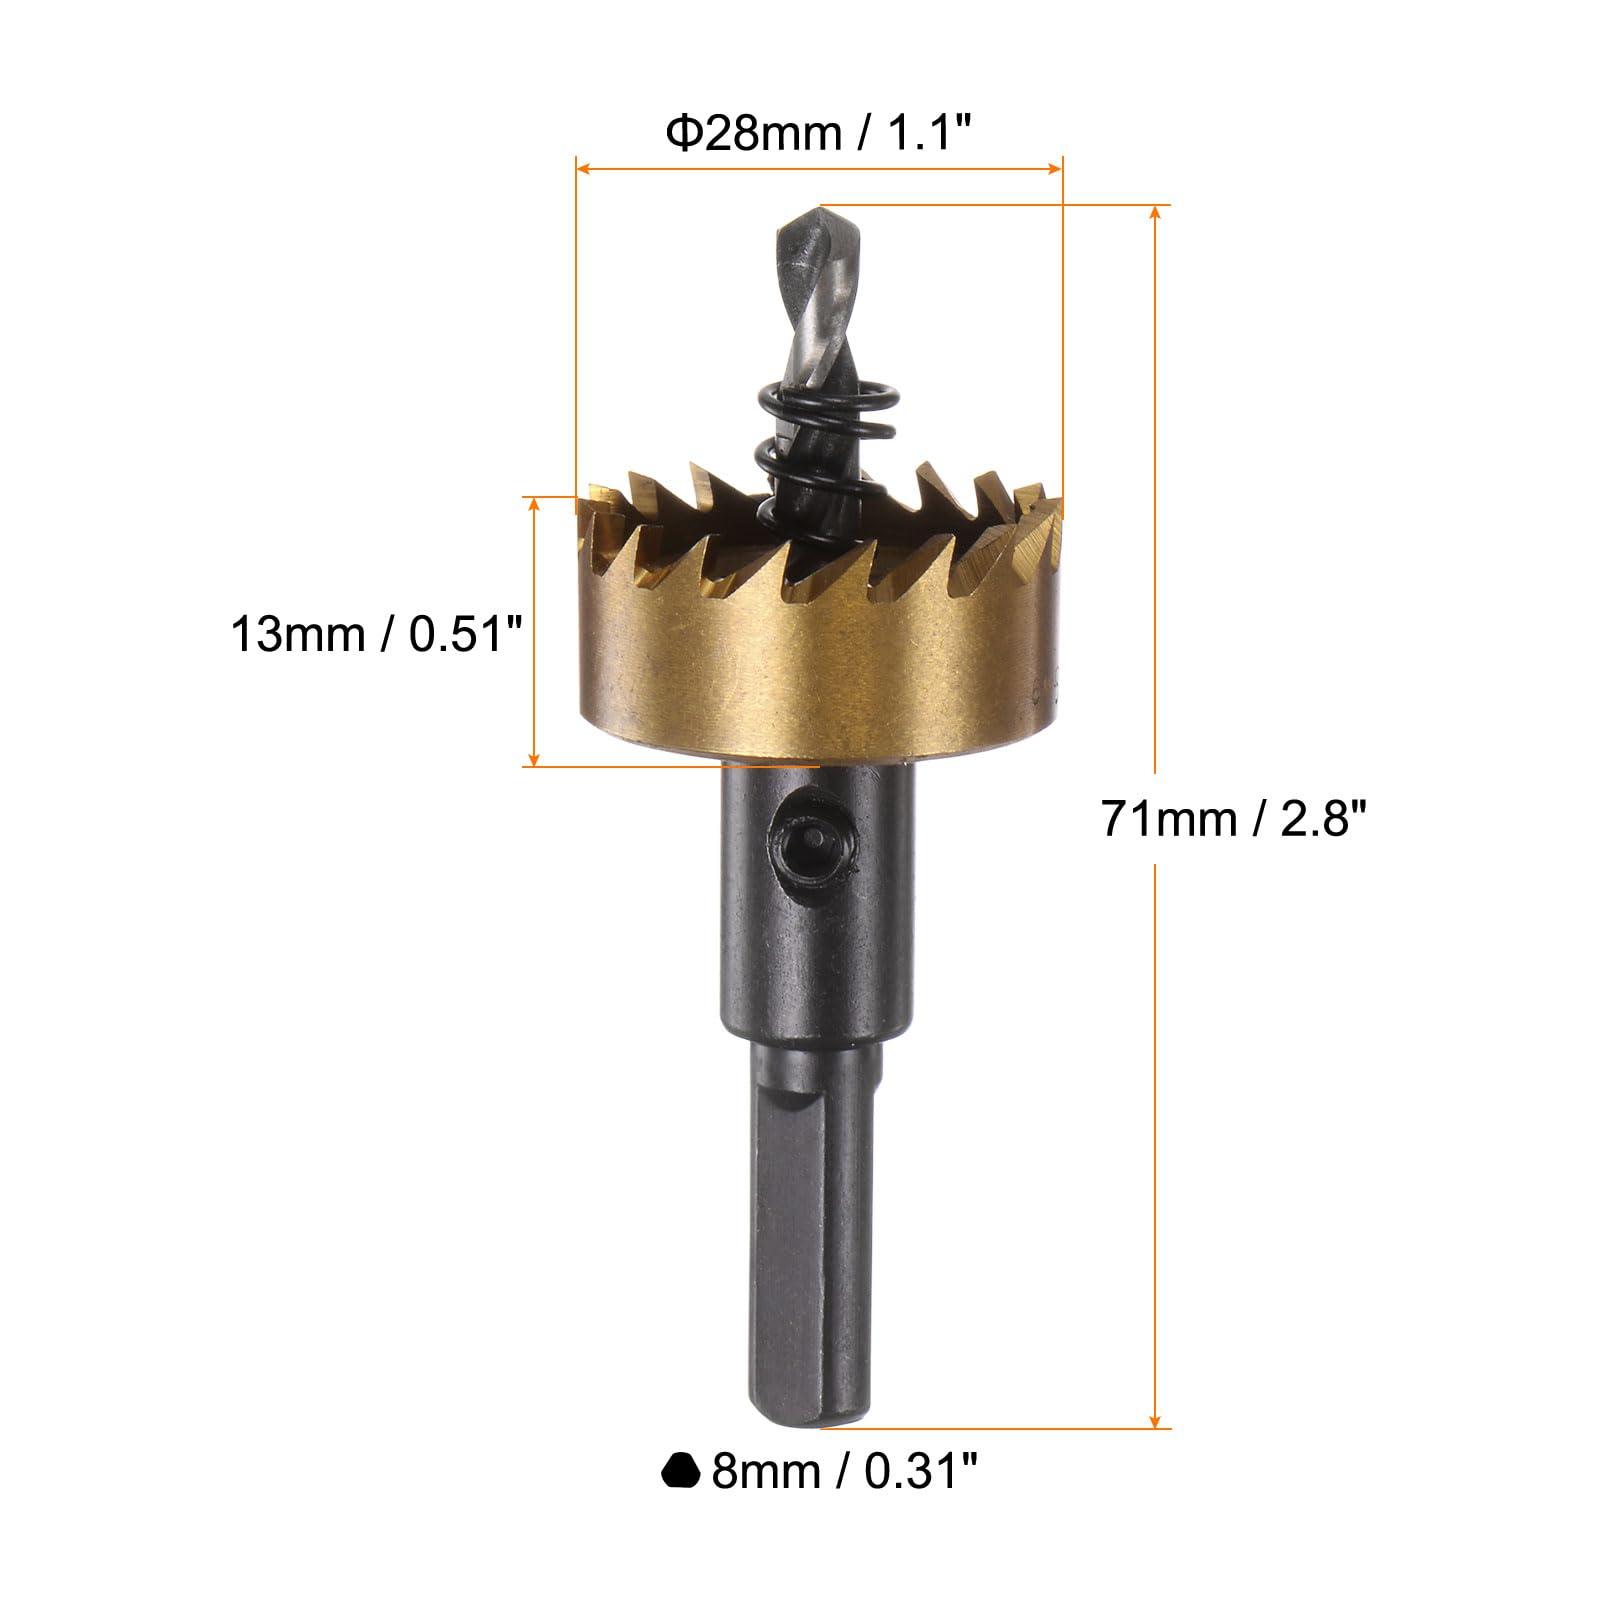 sourcing map 2pcs Hole Saws 28mm (1-1/8") M35 HSS (High Speed Steel) Titanium Coated Drill Bits Cutters Openers for Stainless Steel Aluminum Alloy Metal Wood Plastic 1